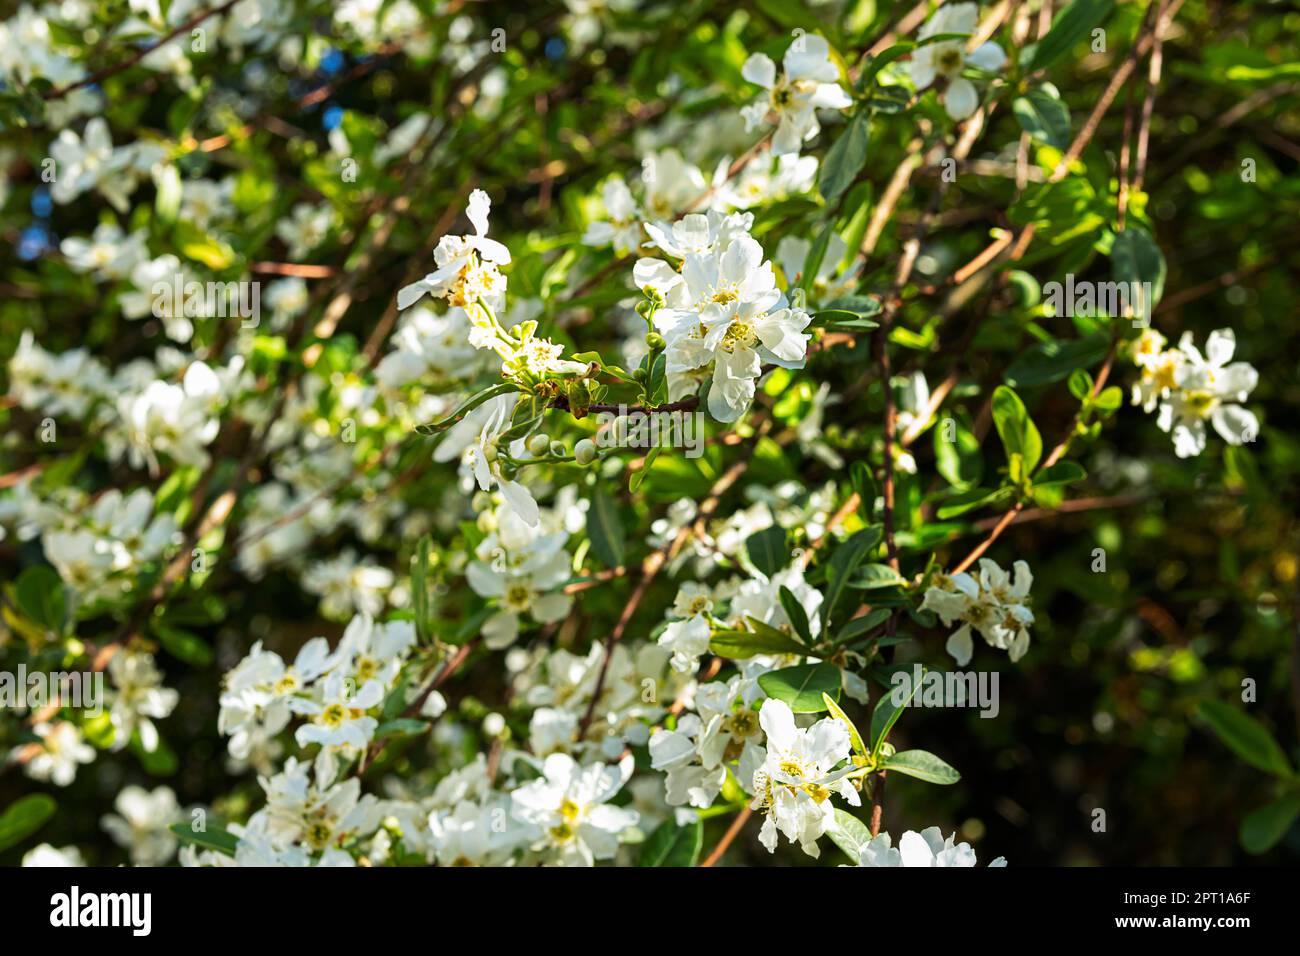 Spring flowering jasmine bush as a natural background Stock Photo